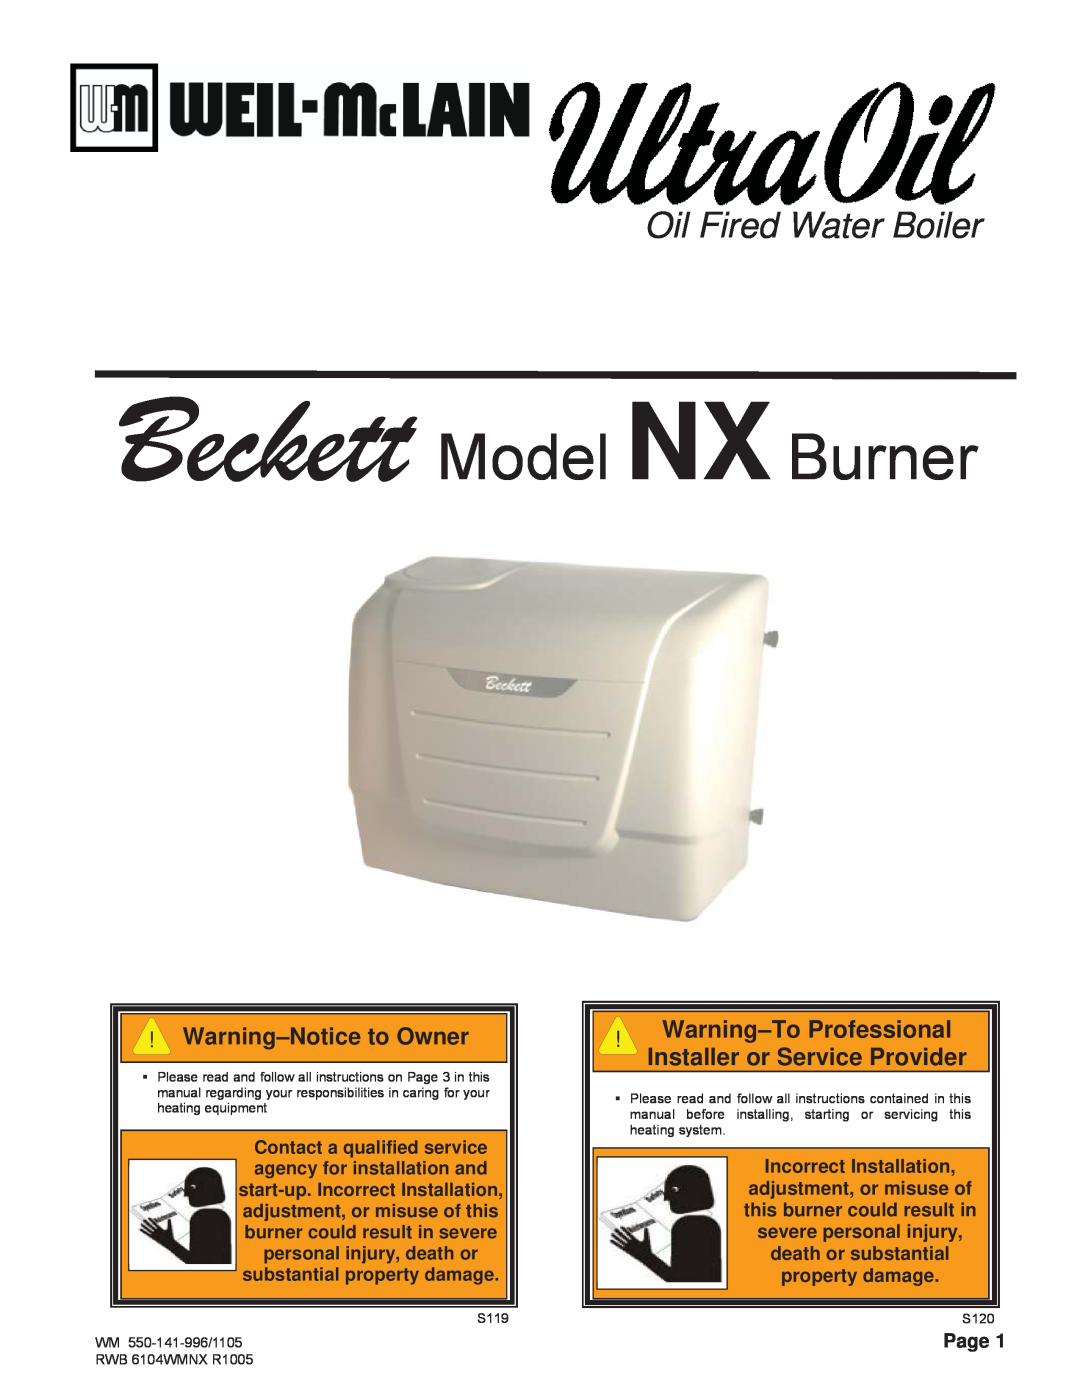 Weil-McLain manual Warning-Noticeto Owner, Page, Incorrect Installation, Beckett Model NX Burner 